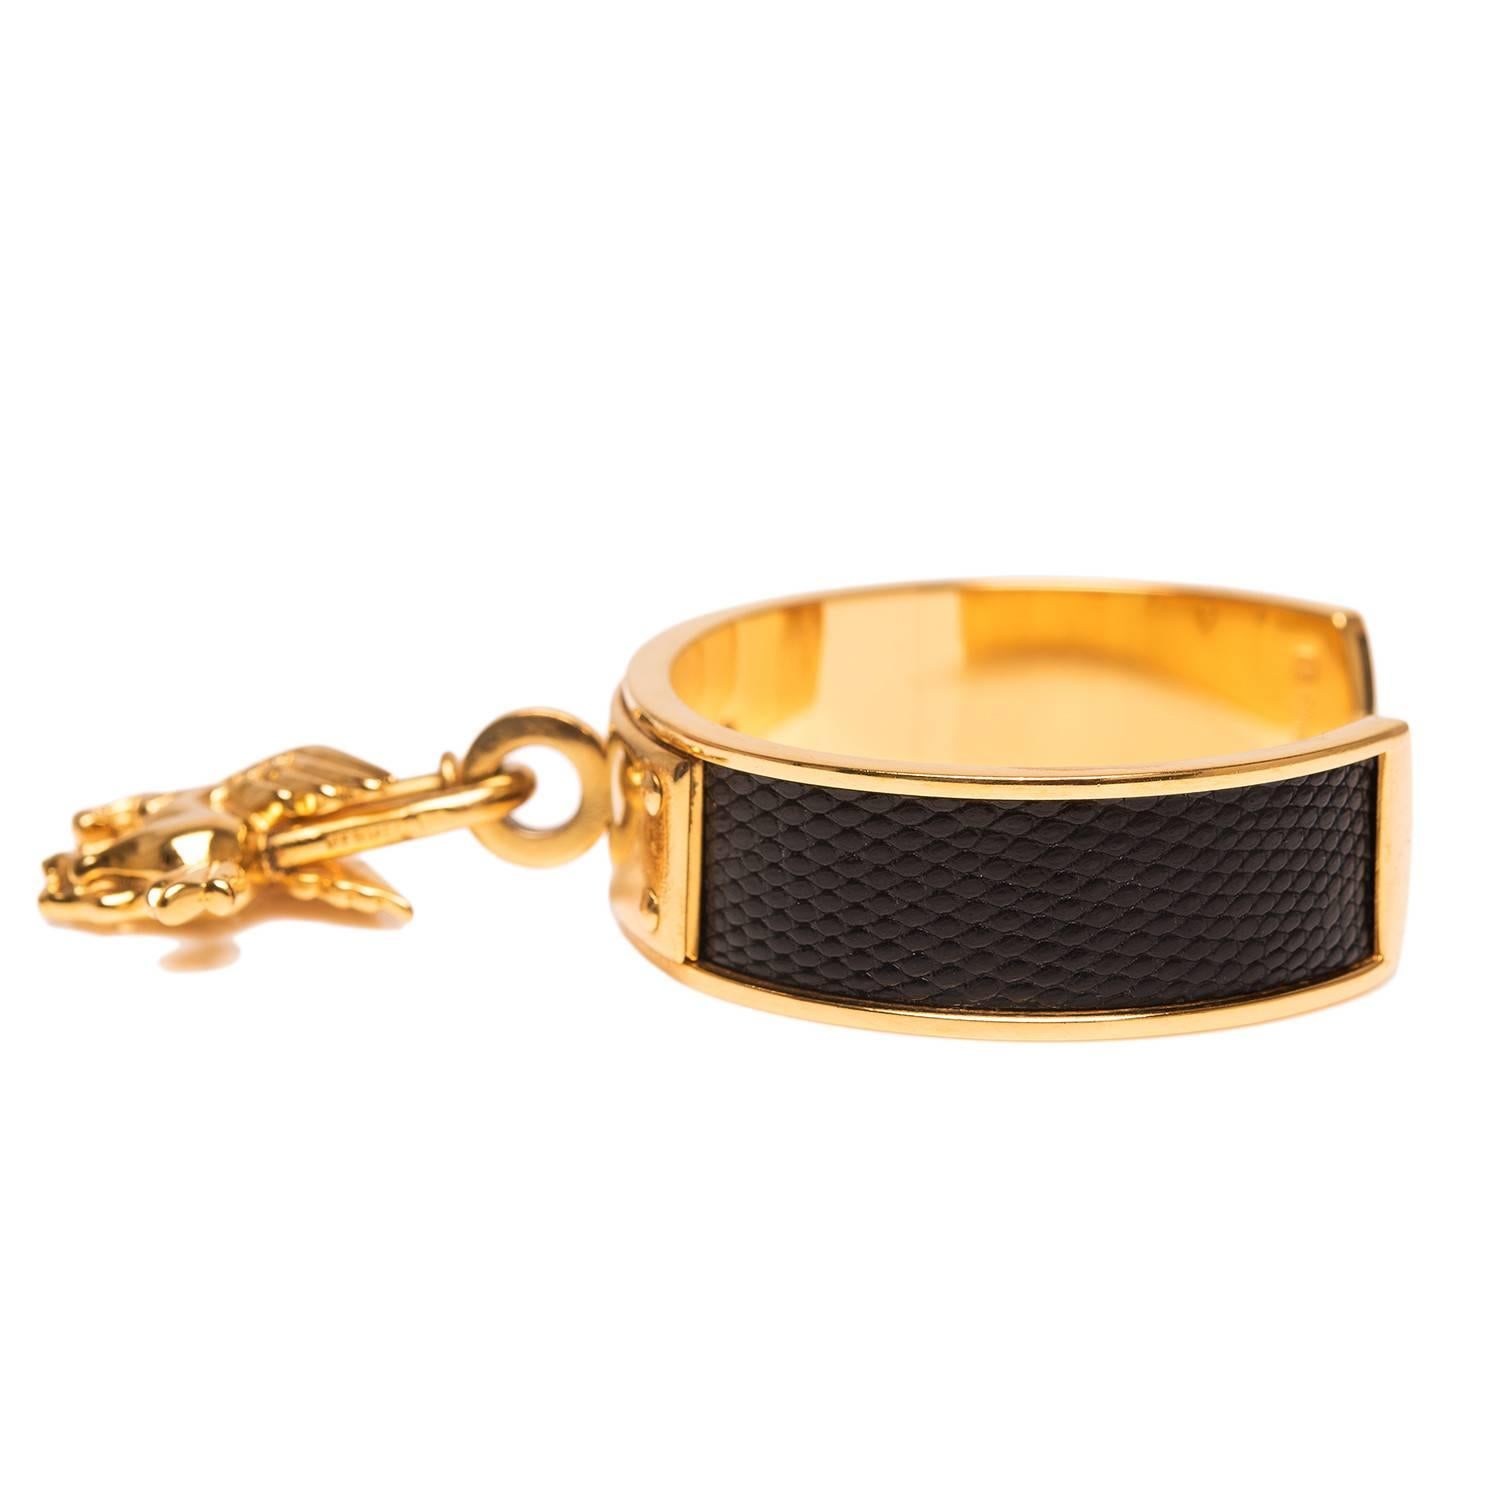 Hermes Black Lizard Kelly Cadena Cuff Bracelet with Gold Pegasus Charm.

This bracelet is made of black lizard with gold plated hardware.

Origin: France

Condition: Pre-owned; excellent

Accompanied by: Hermes box

Measurements: Bracelet: